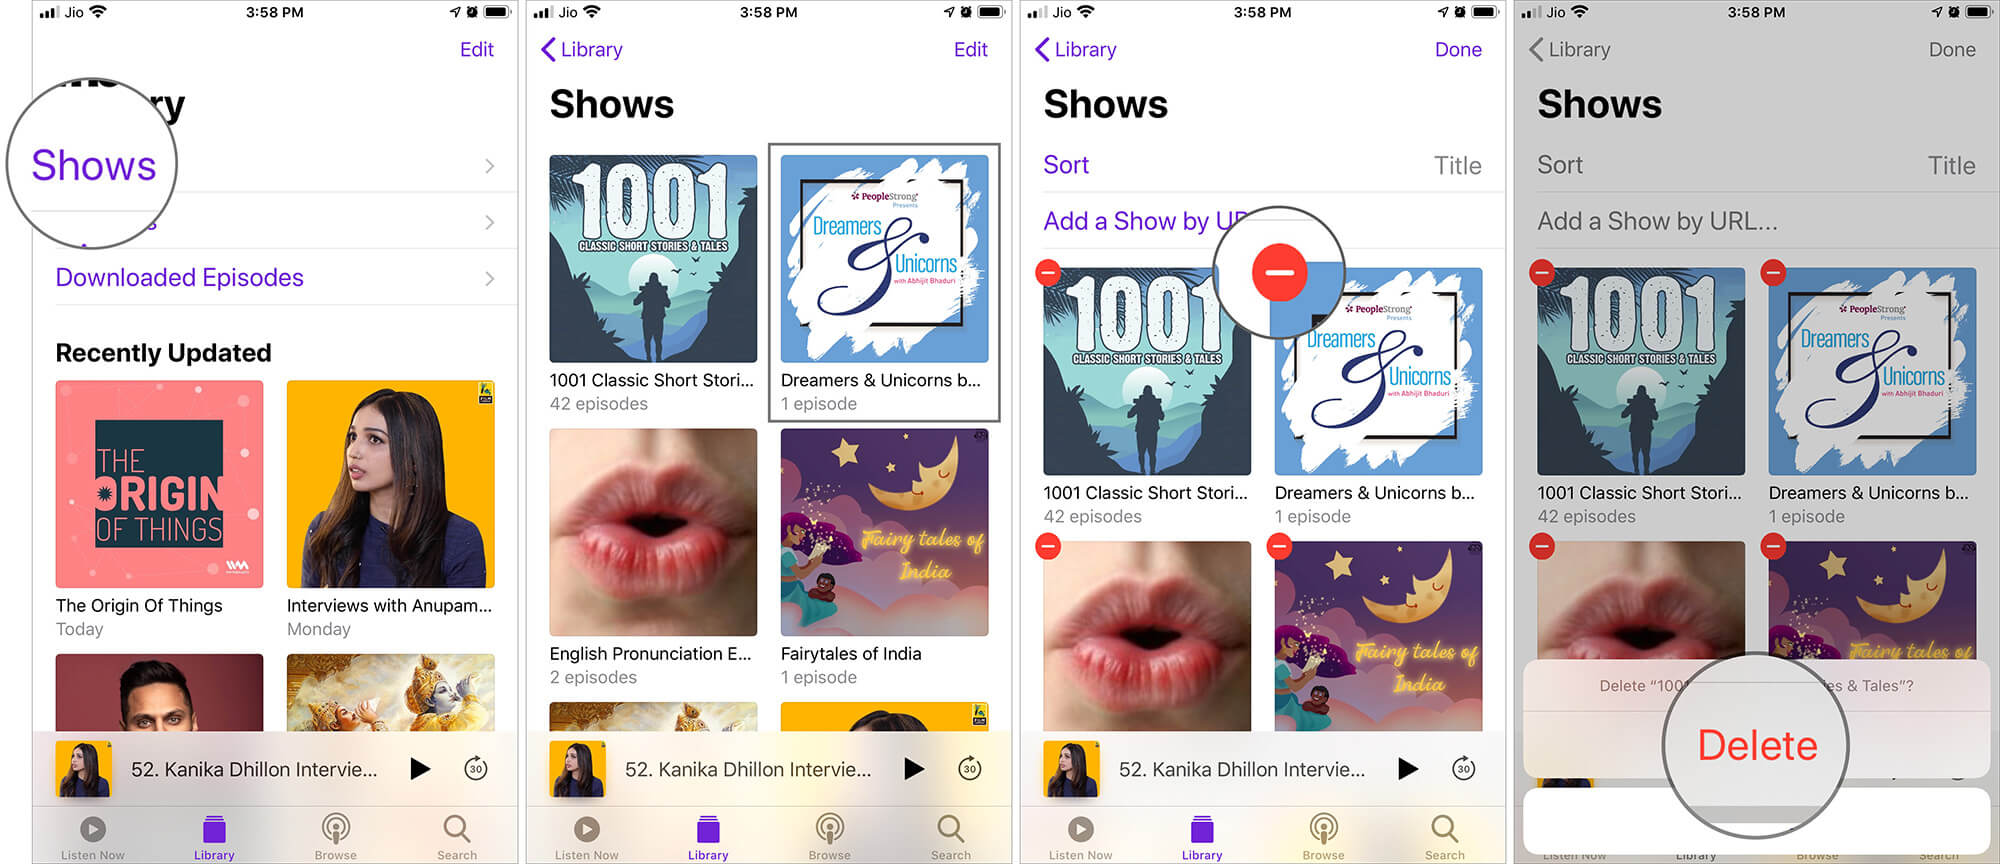 Select Show and Tap on Delete to Remove Show from Podcasts App on iPhone